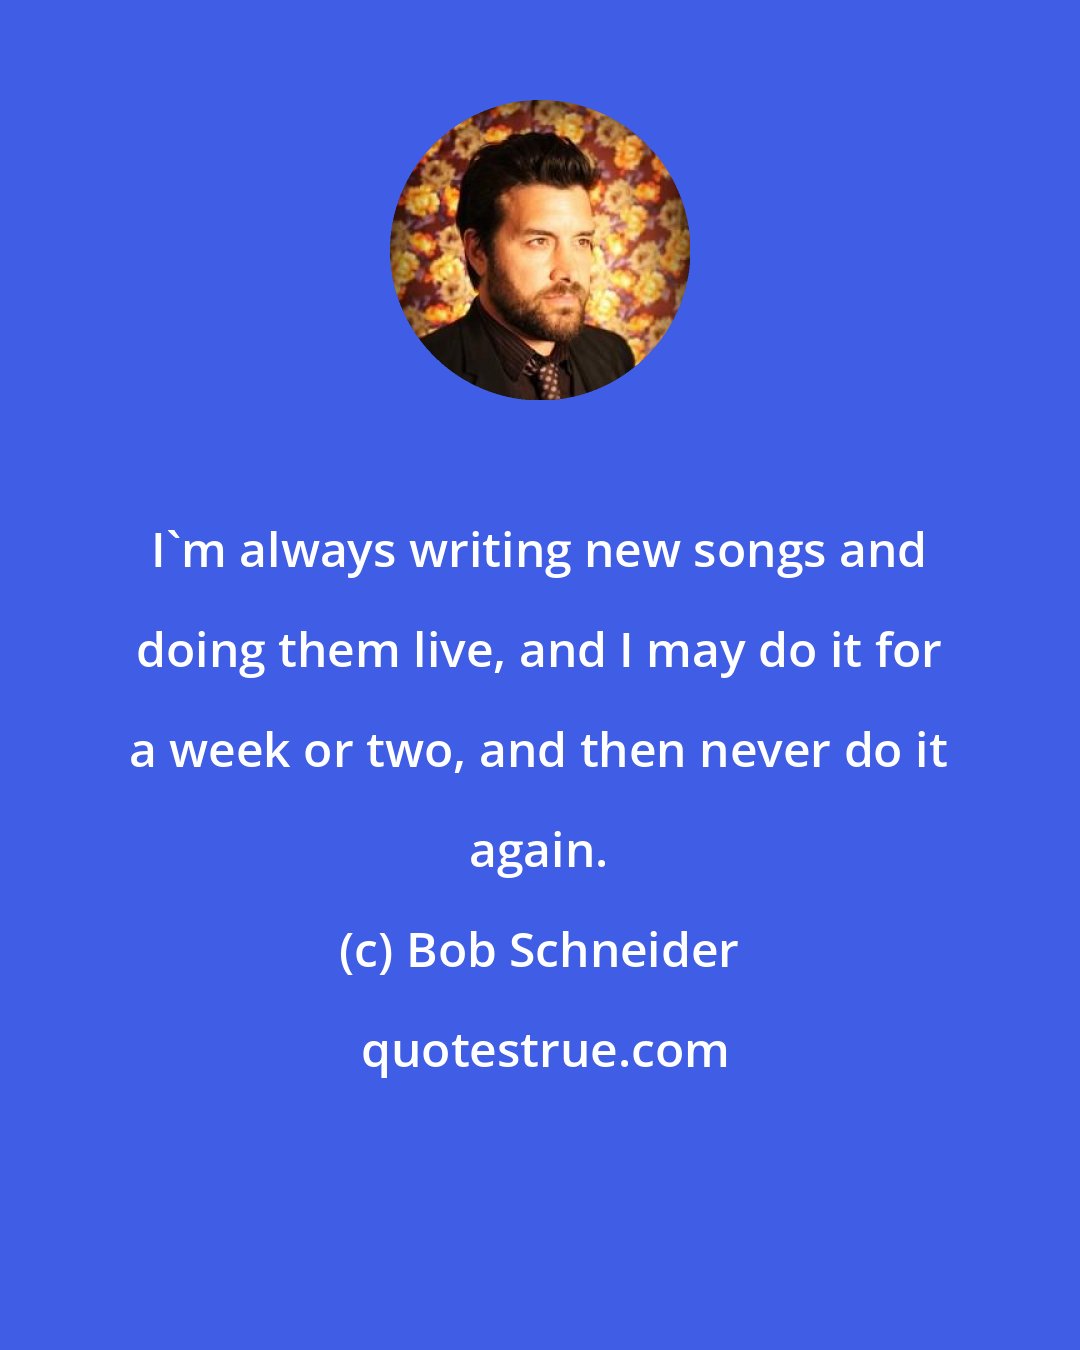 Bob Schneider: I'm always writing new songs and doing them live, and I may do it for a week or two, and then never do it again.